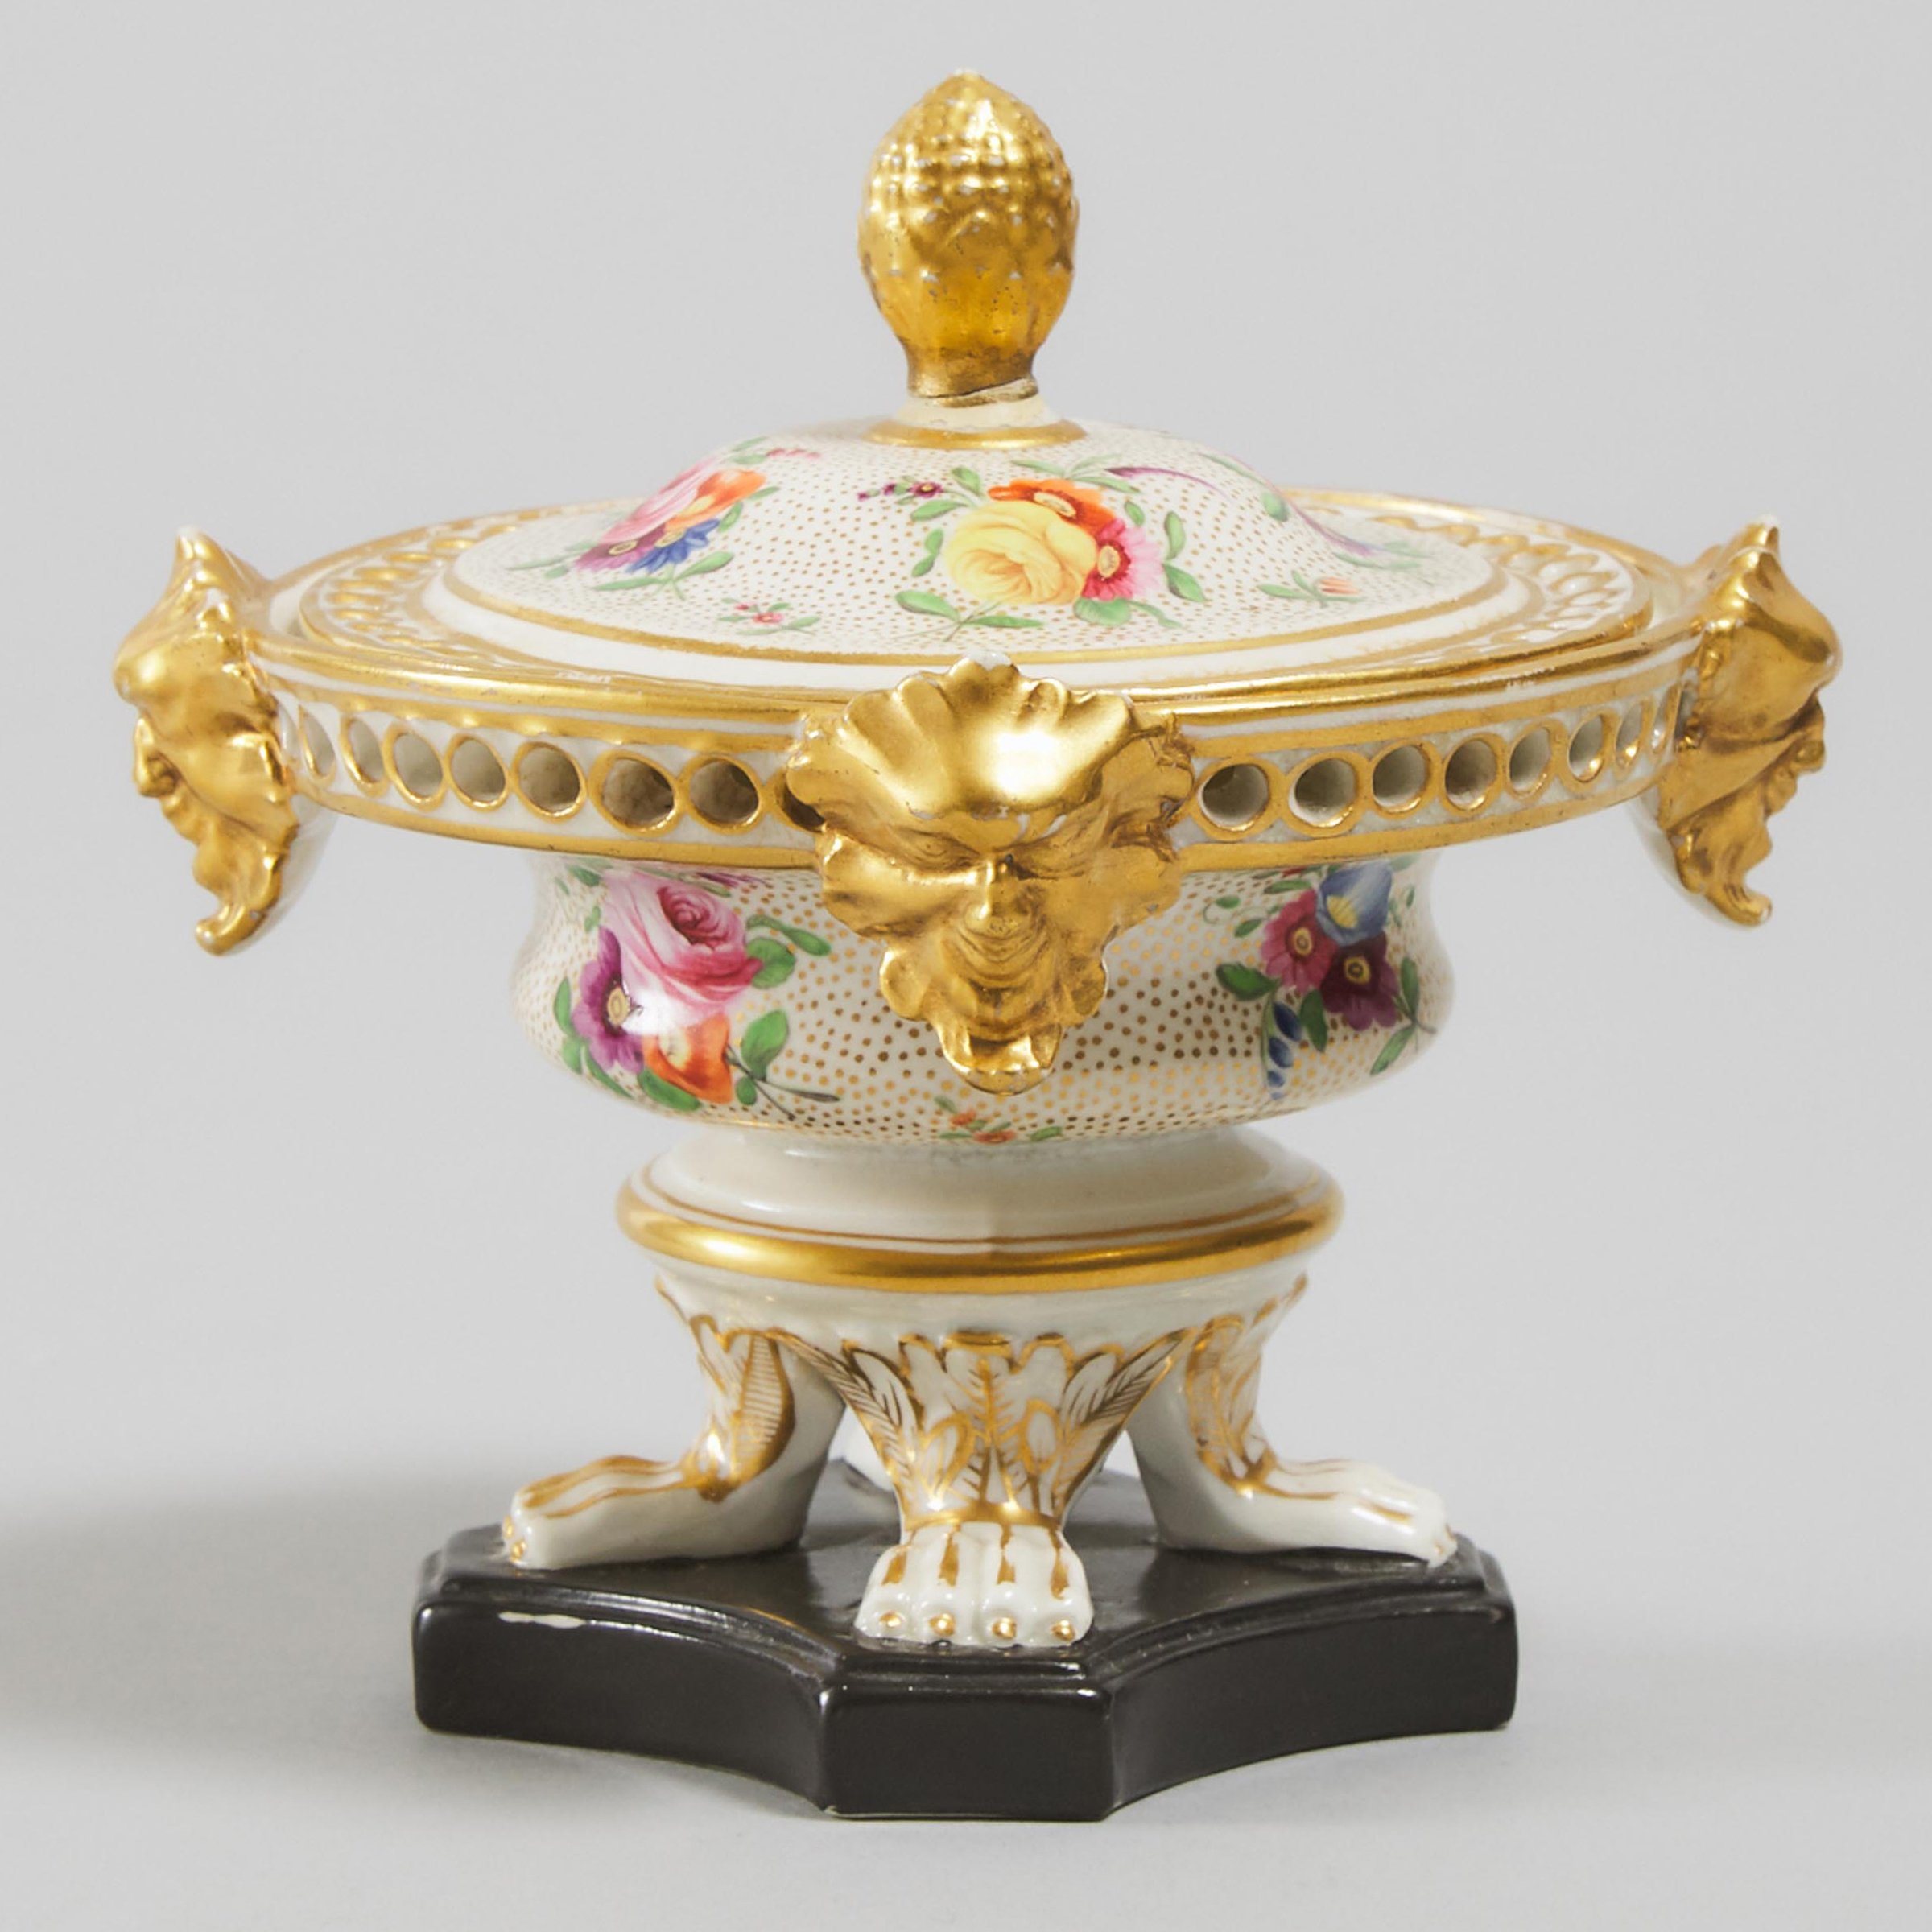 Derby Pastille Burner, early 19th century